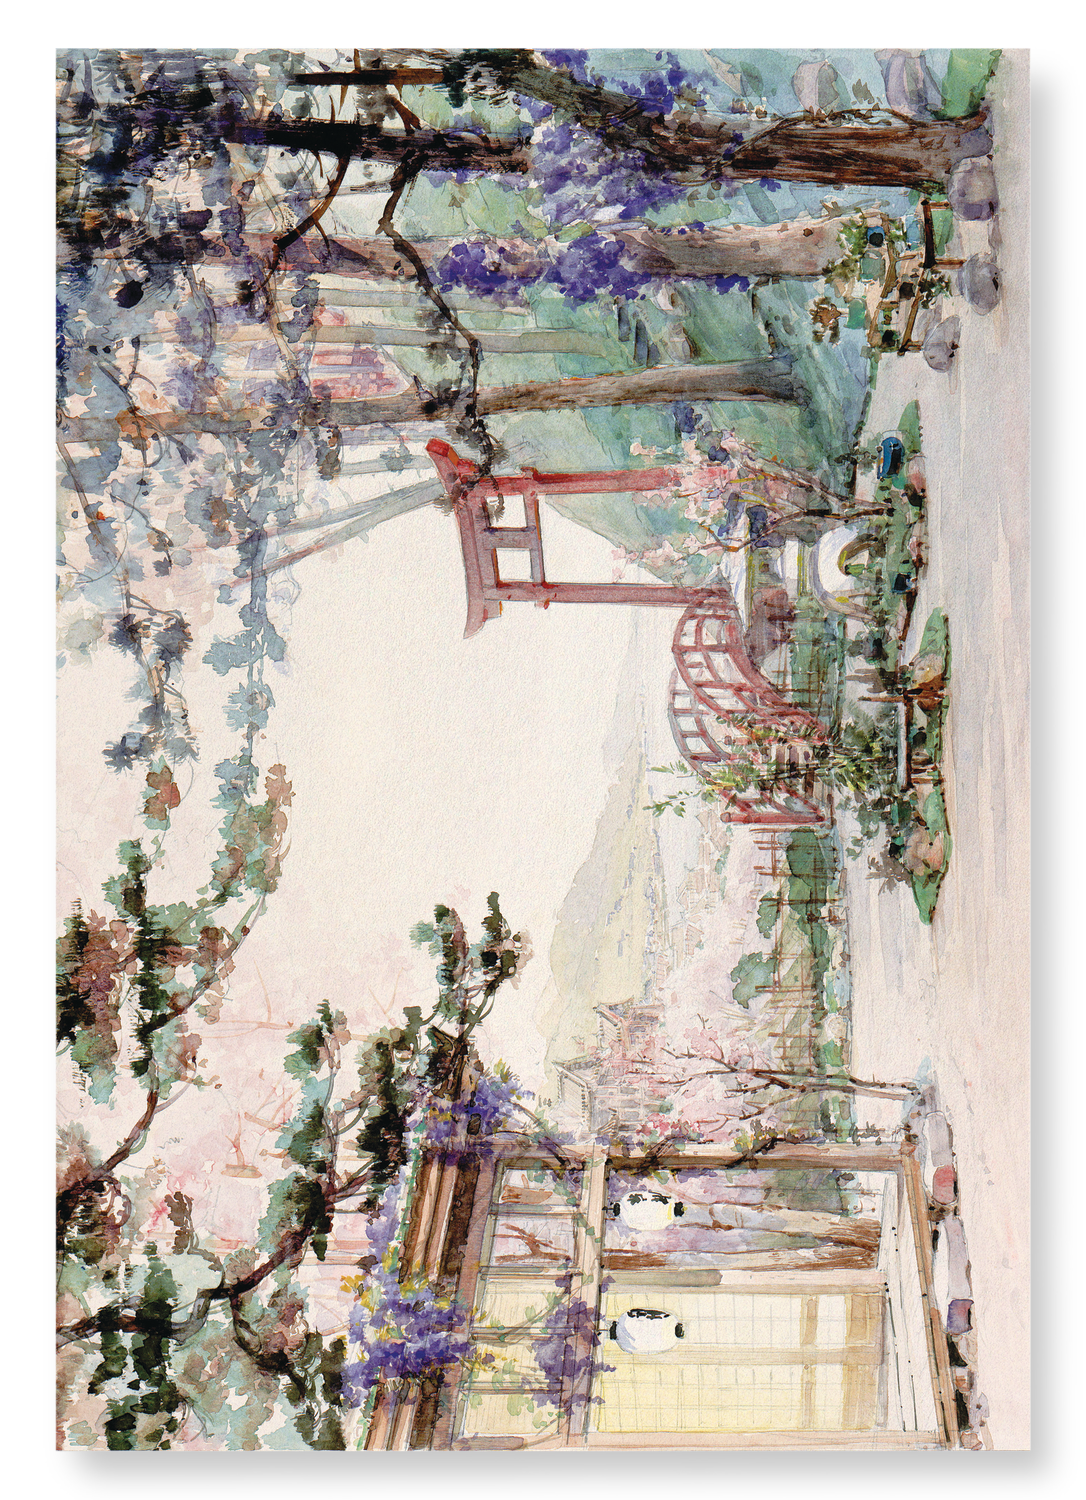 SET DESIGN FOR MADAMA BUTTERFLY (1906)